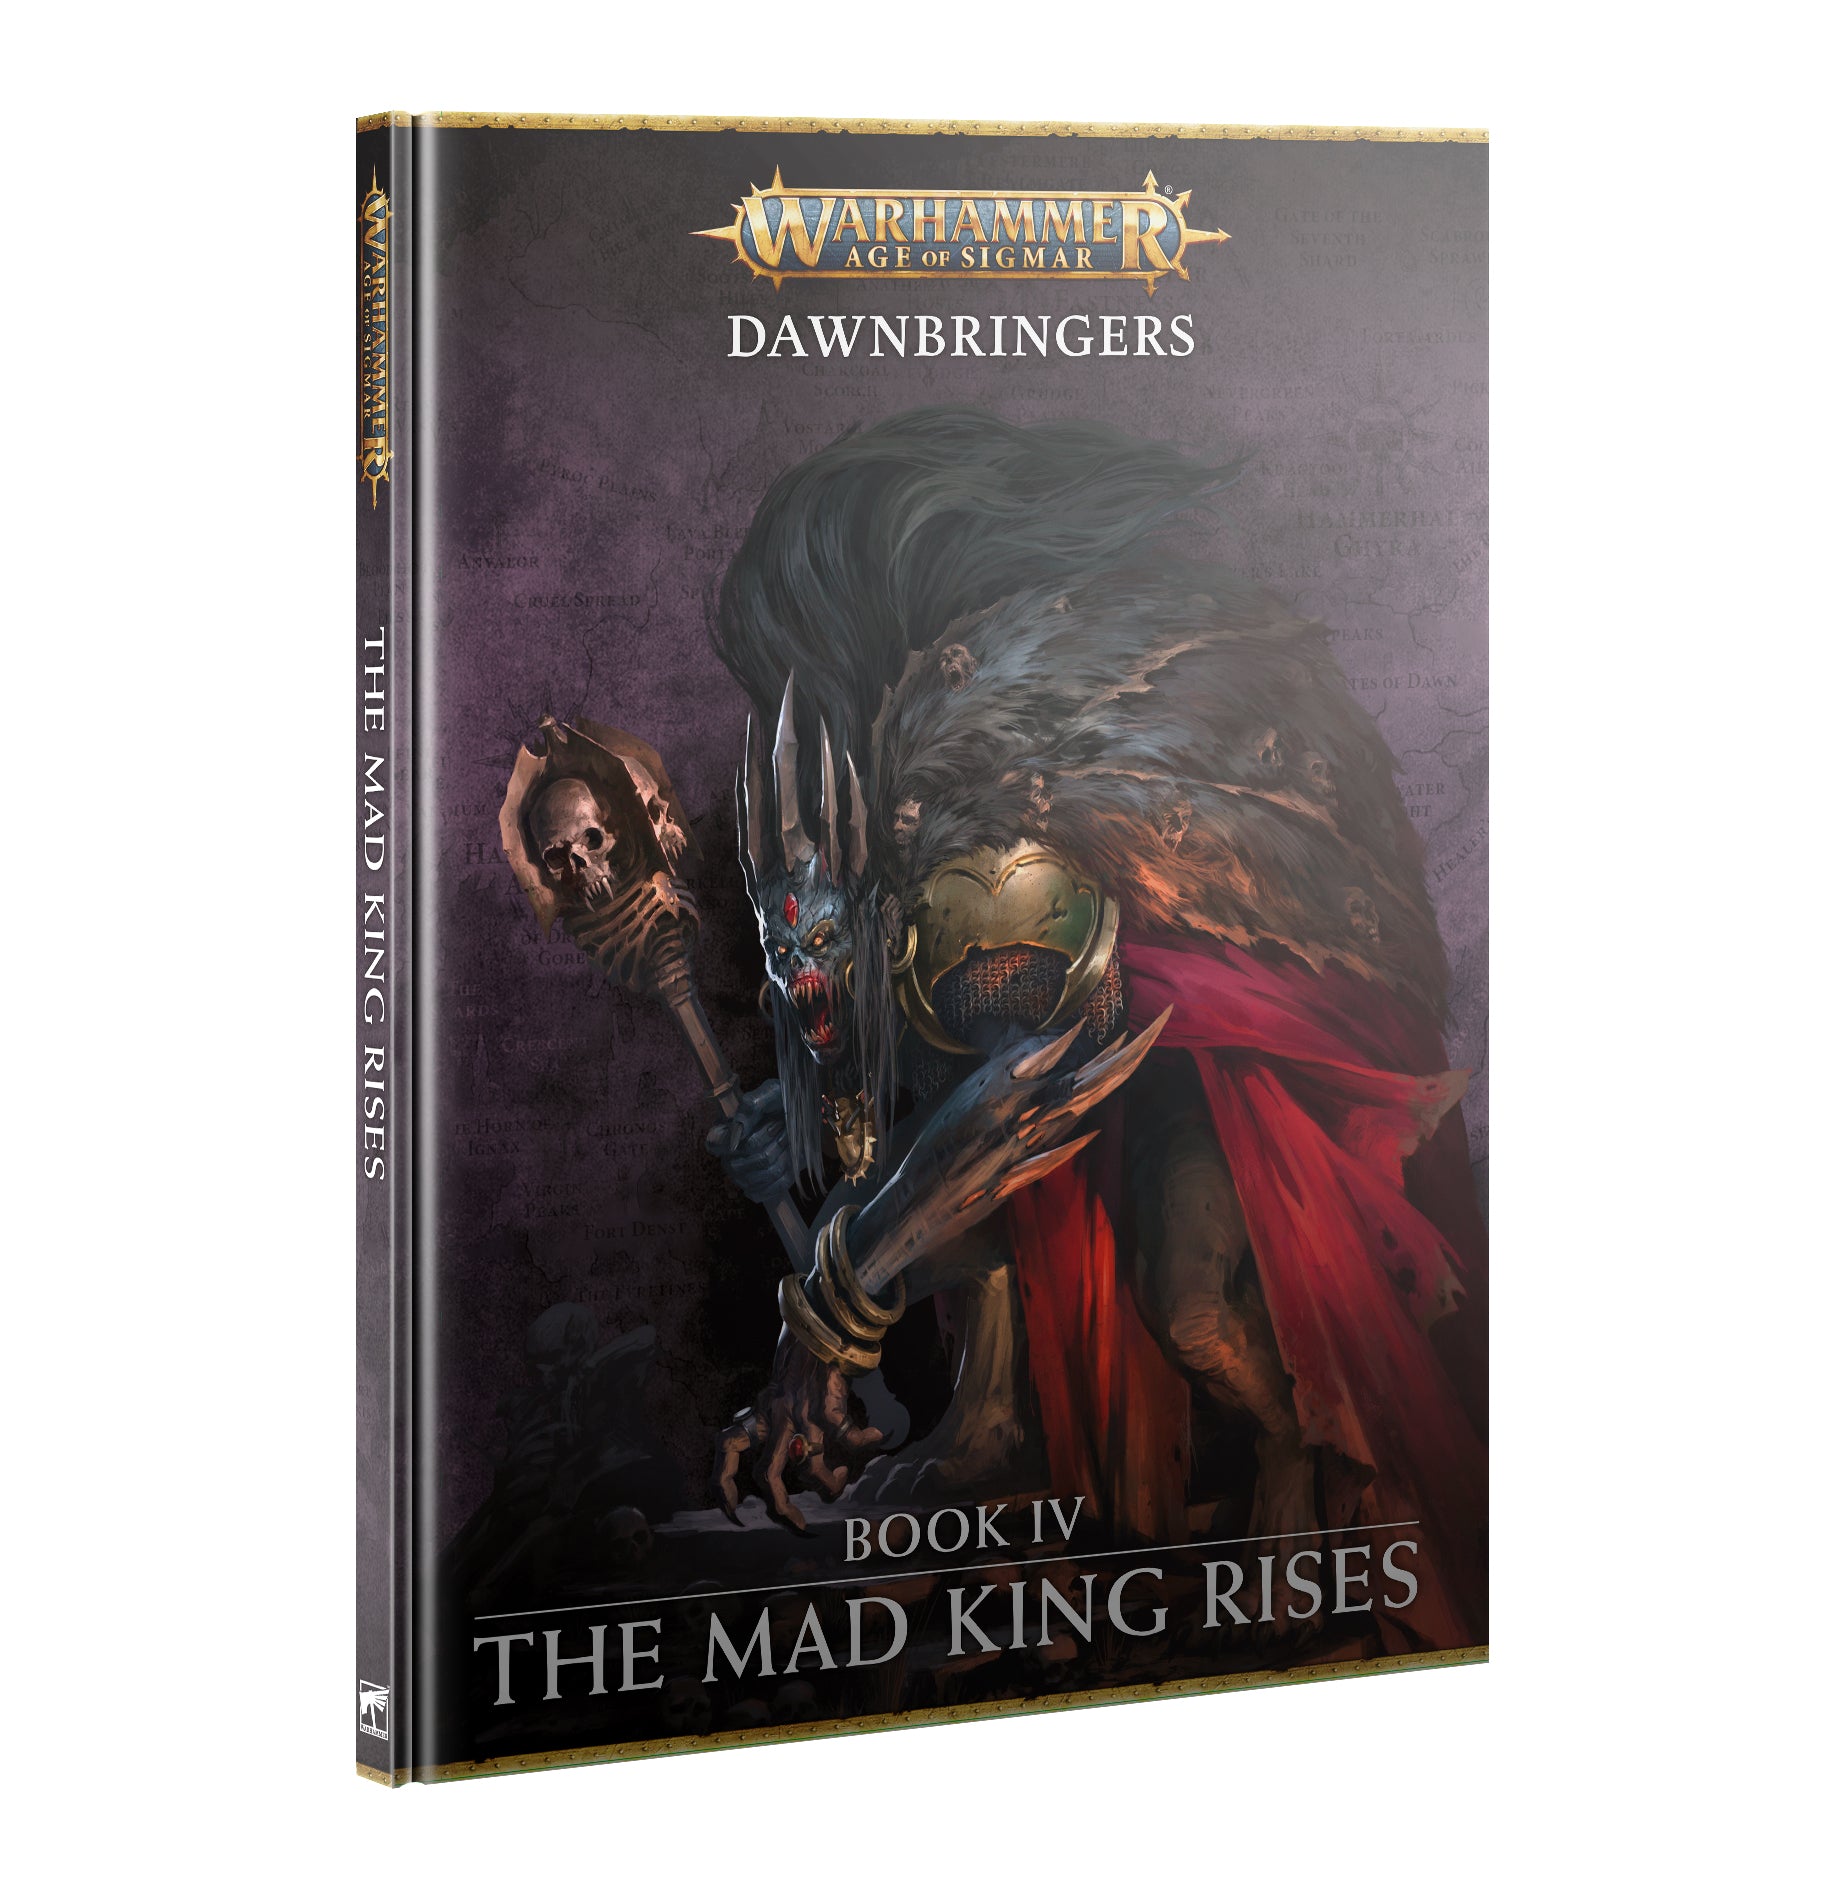 Dawnbringers Book IV - The Mad King Rises product image.